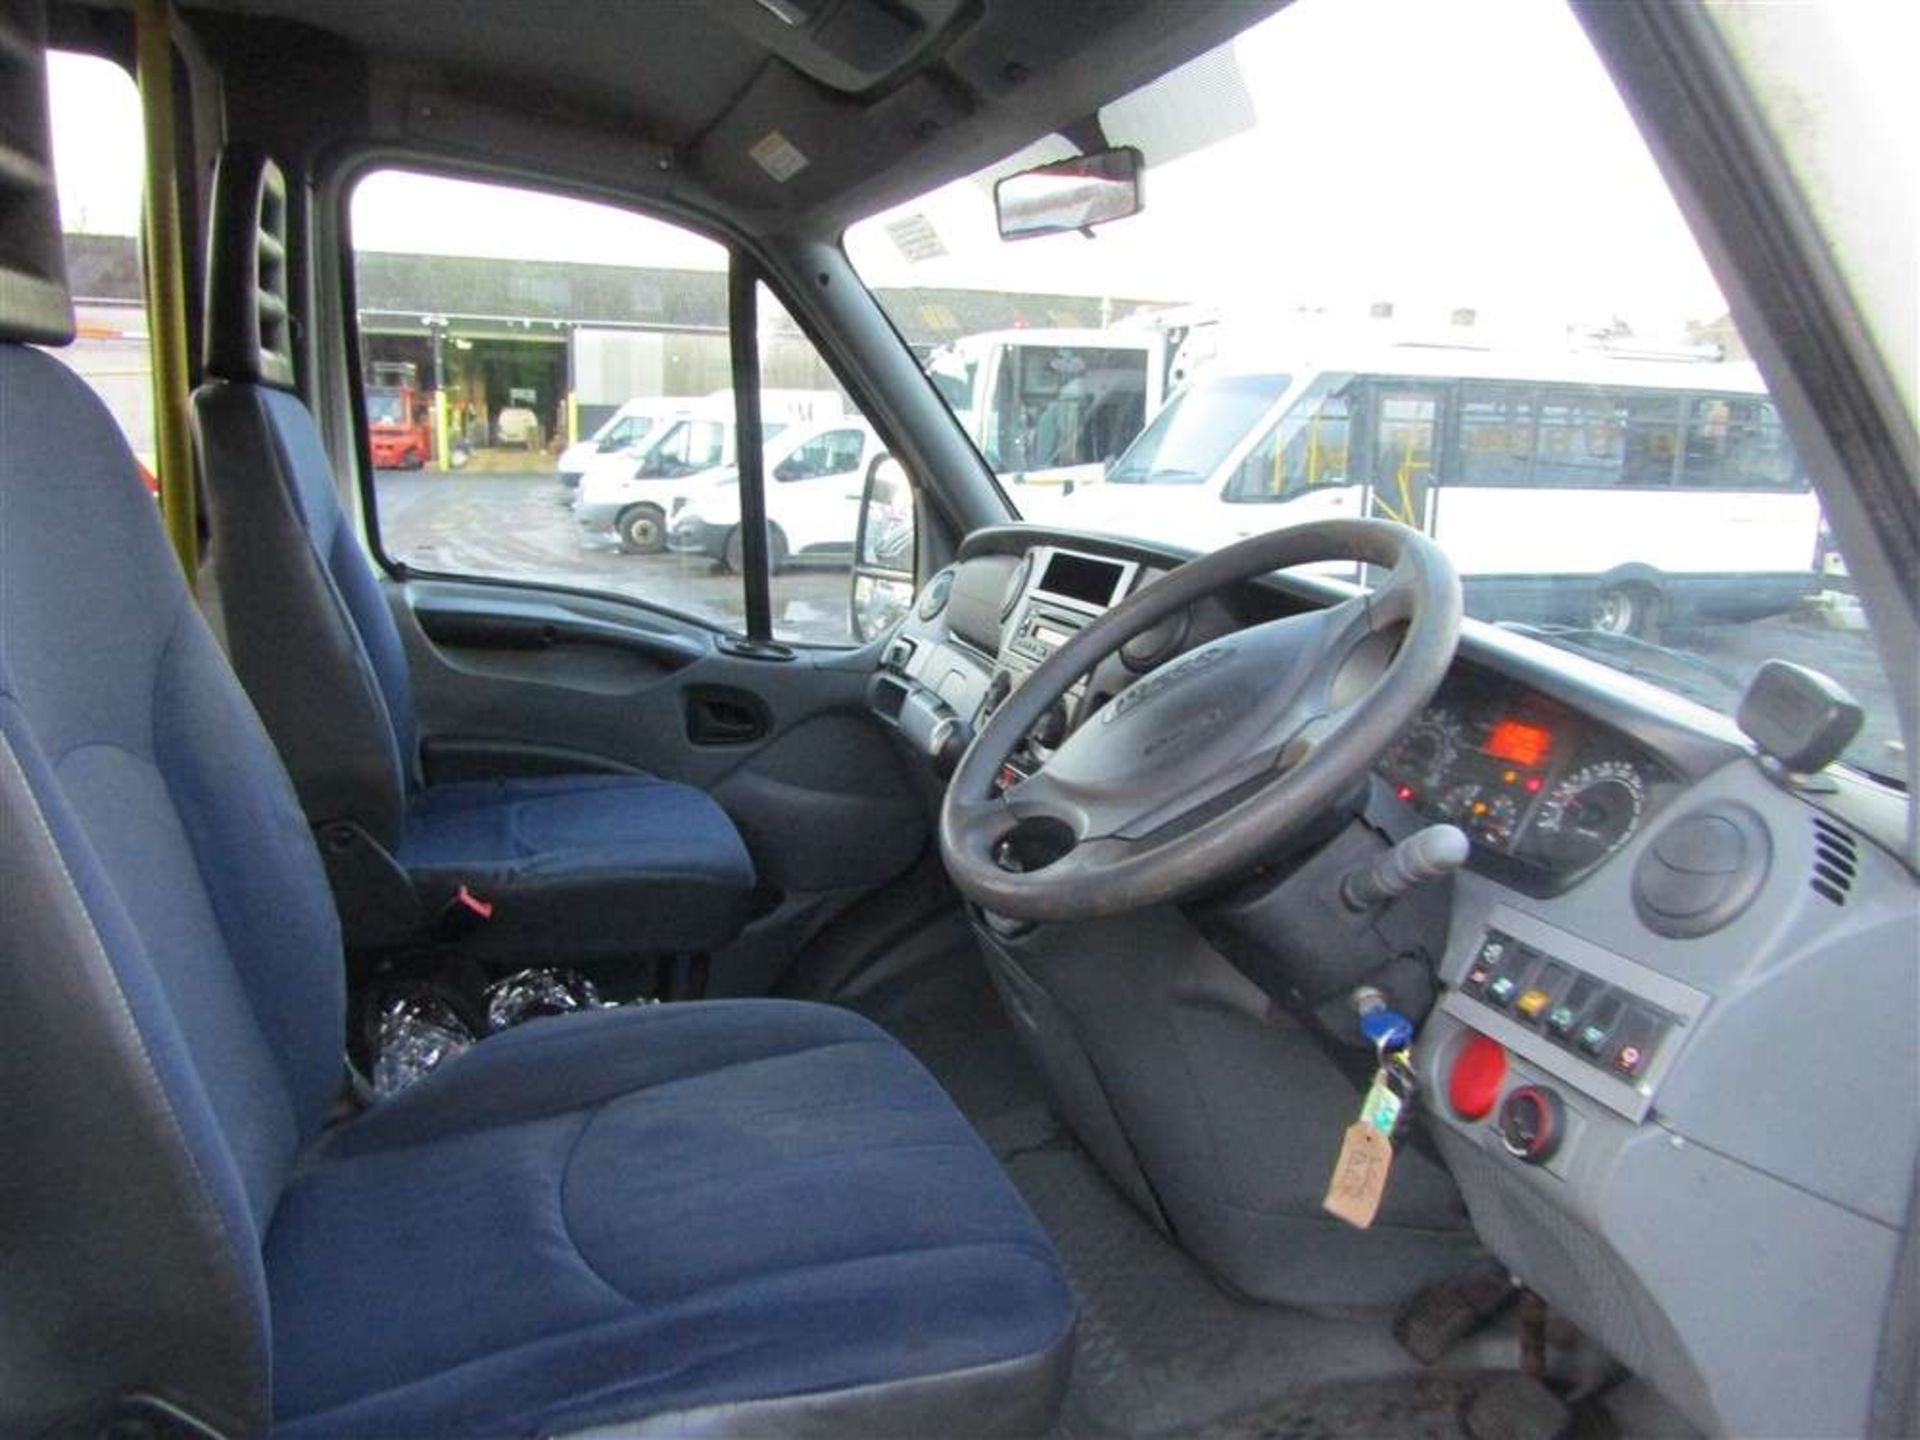 2007 57 reg Iveco Daily 50C15 LWB Welfare Bus - Image 6 of 7